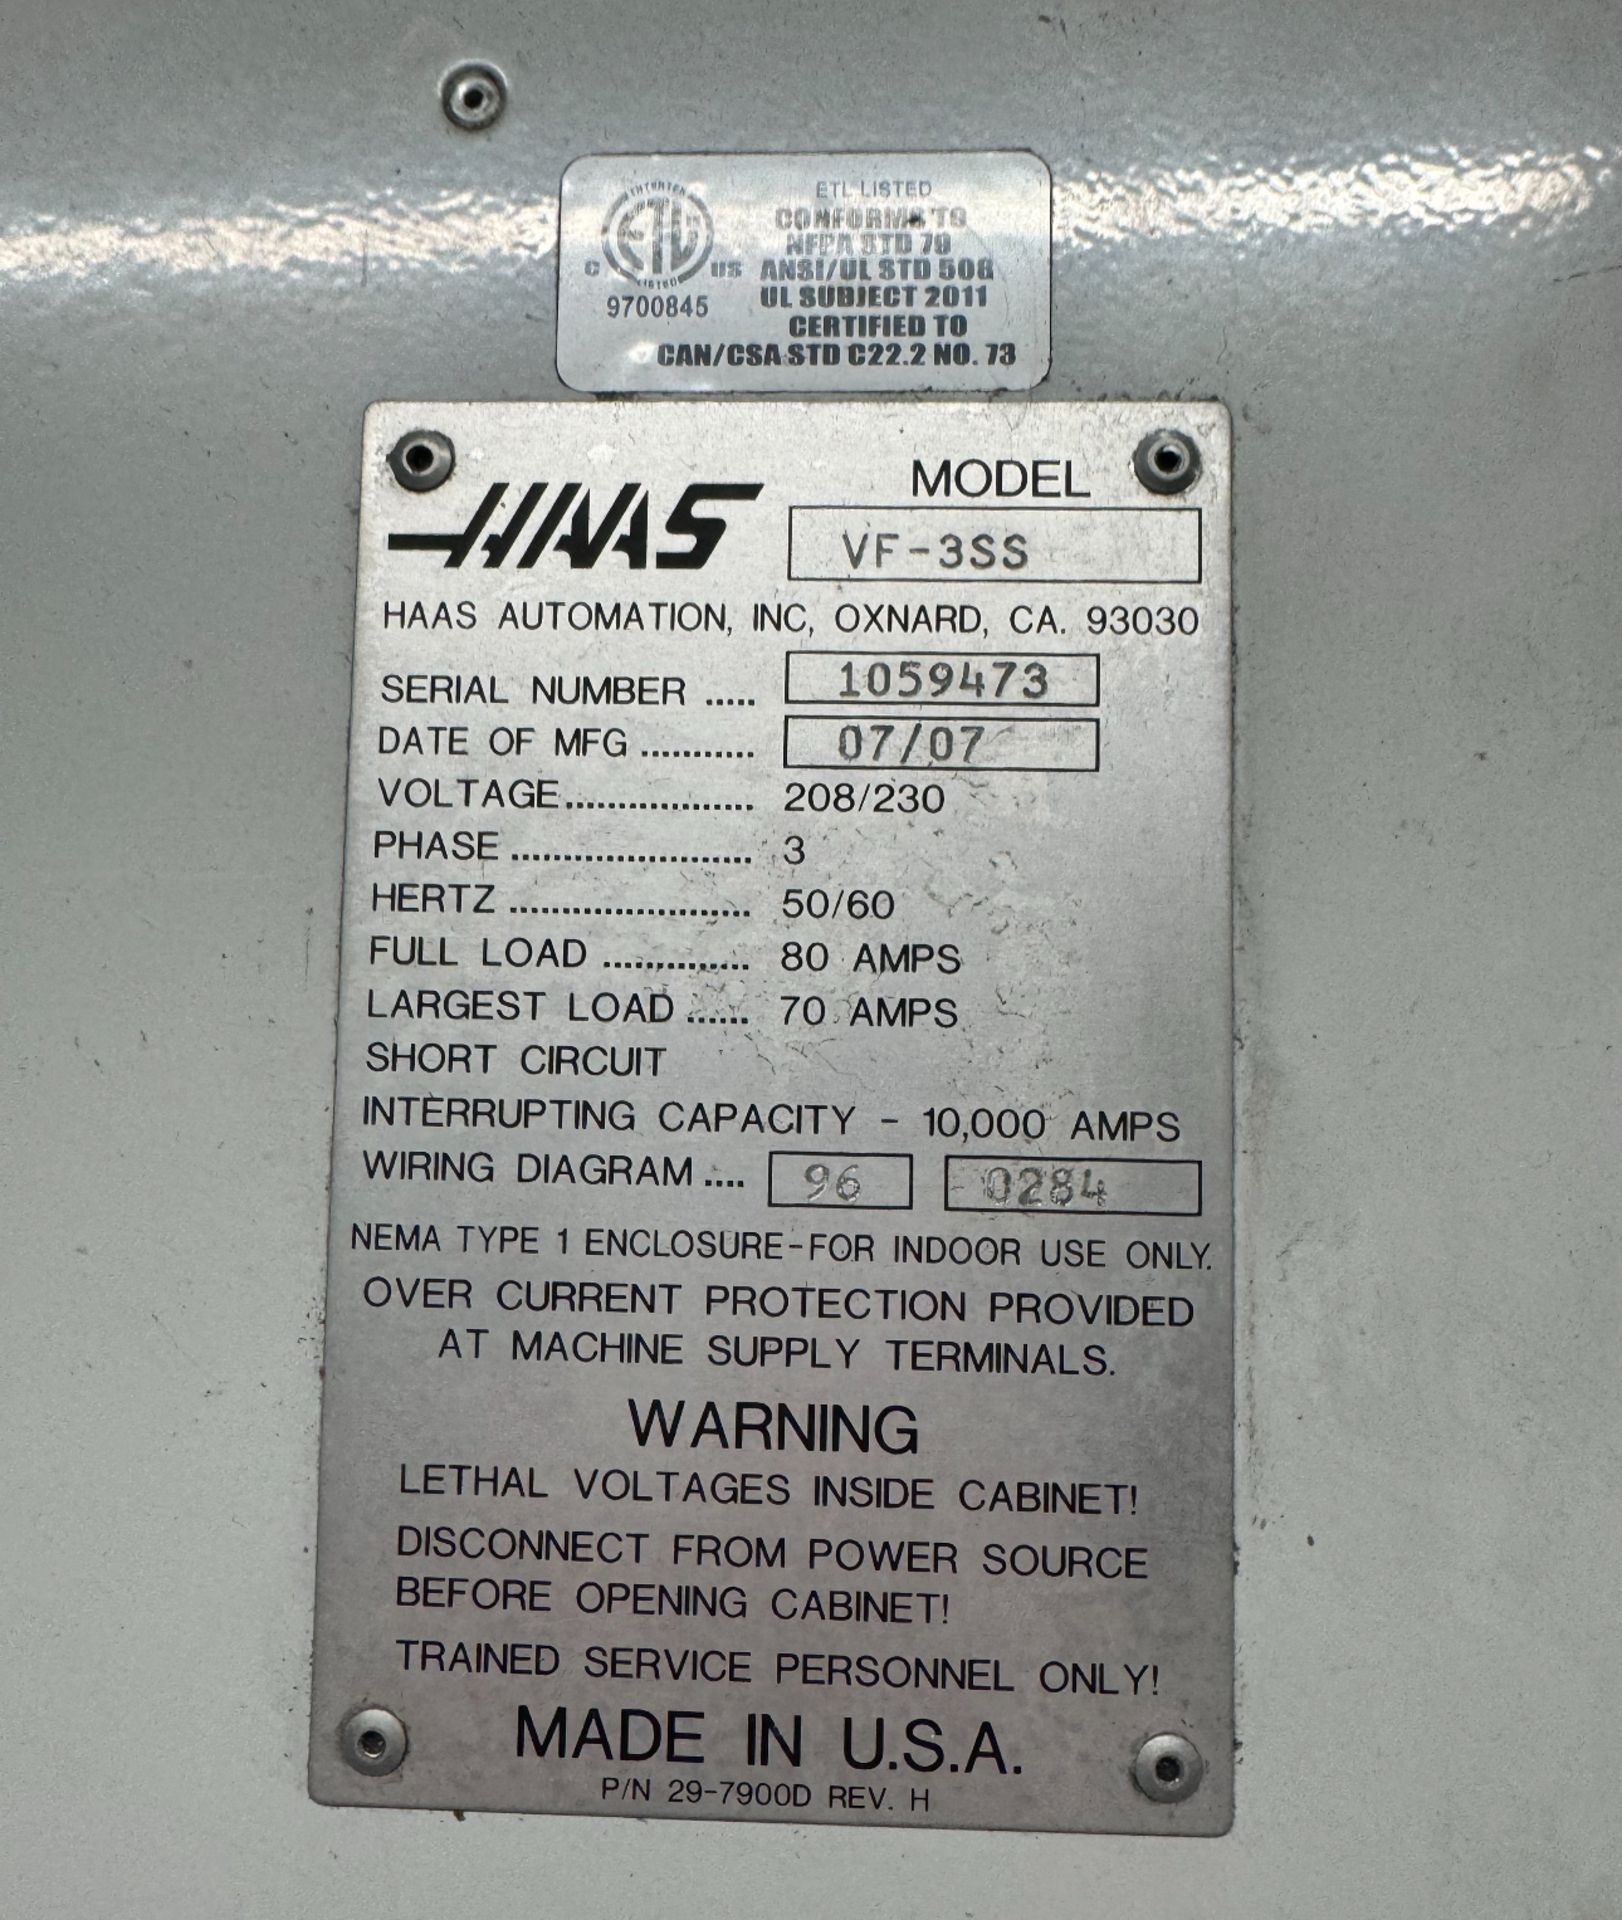 2007 HAAS Mdl. VF 3 SS 4TH Vertical Machining Center - Image 9 of 9